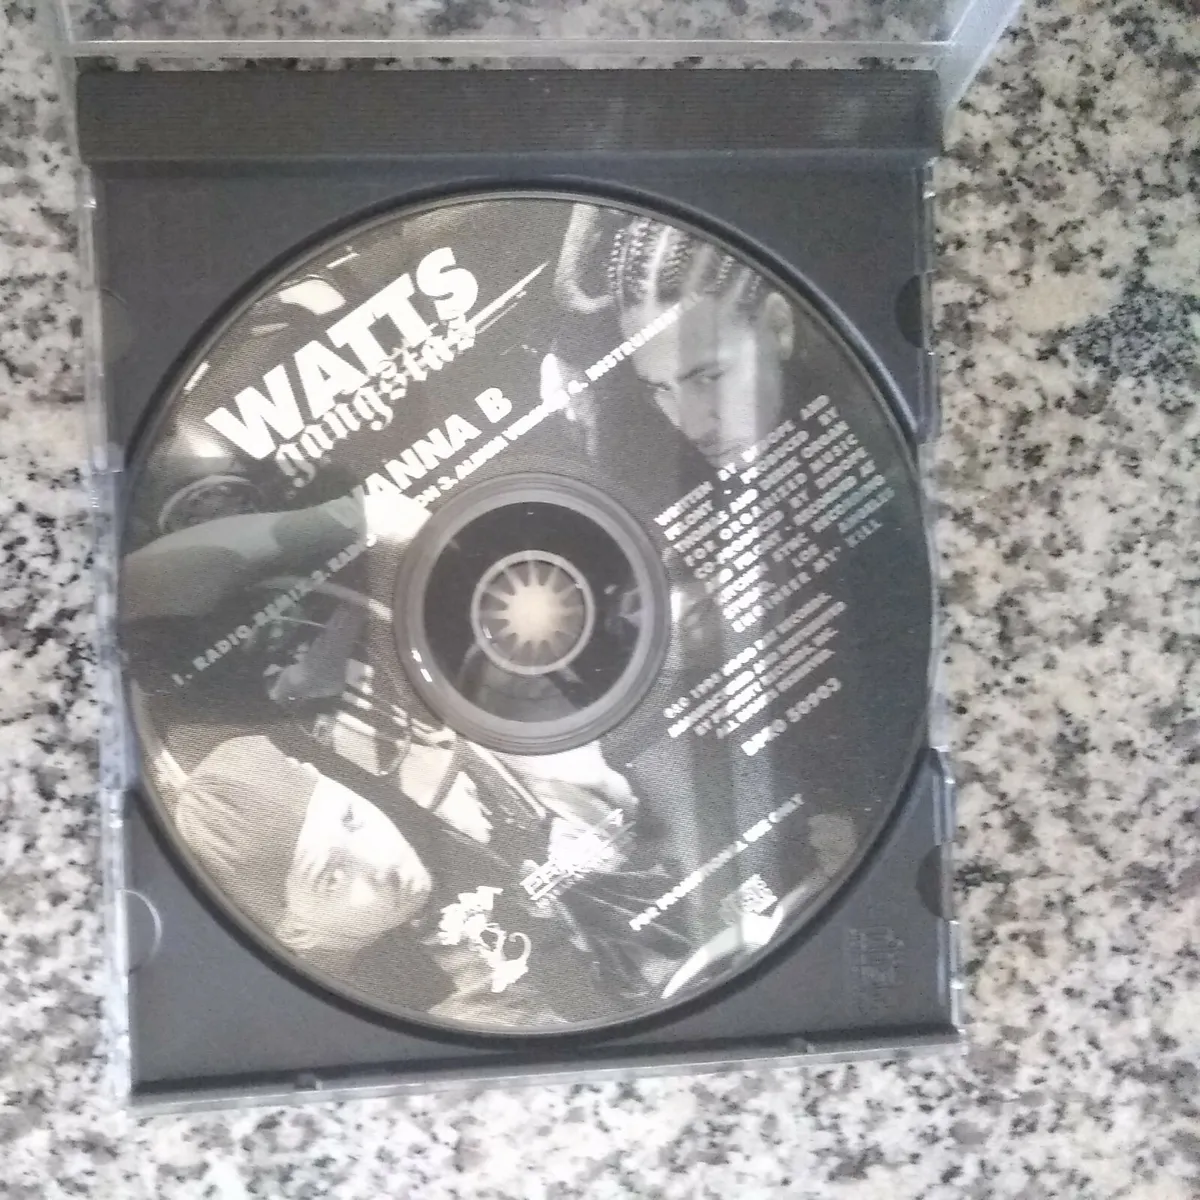 The Real Watts Gangstas CD 1995 Wanna B SINGLE PROMO ONLY RARE REMIX  PRIORITY